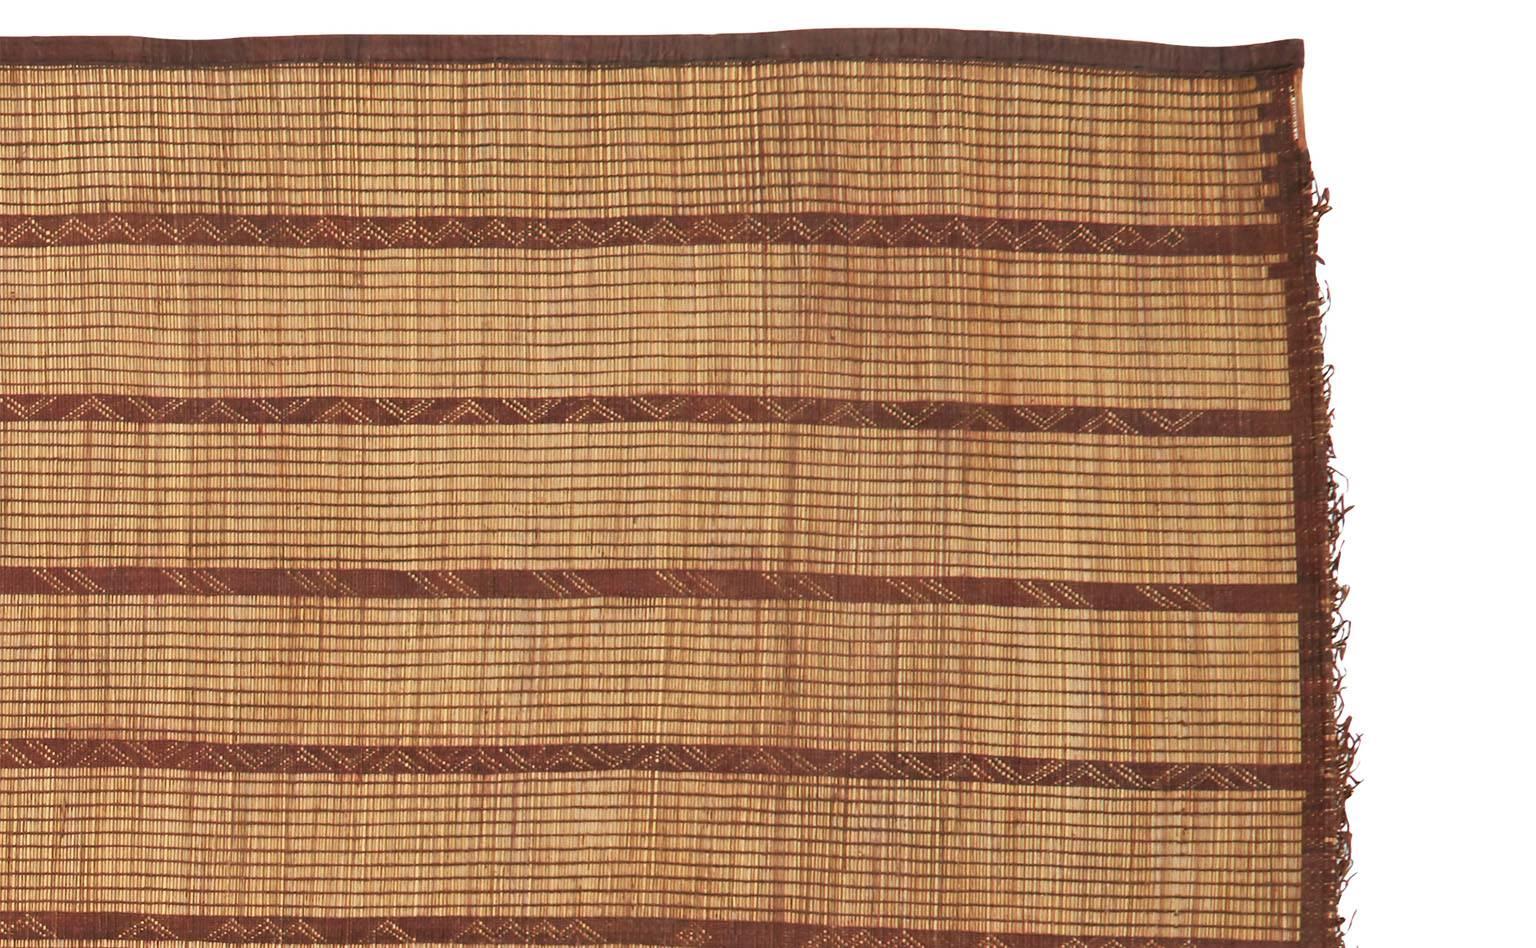 Handwoven from dwarf palm leaf fibers and goat leather.
Flat-weave.
From the desert region of Mauritania.
Measures: 13' x 9'